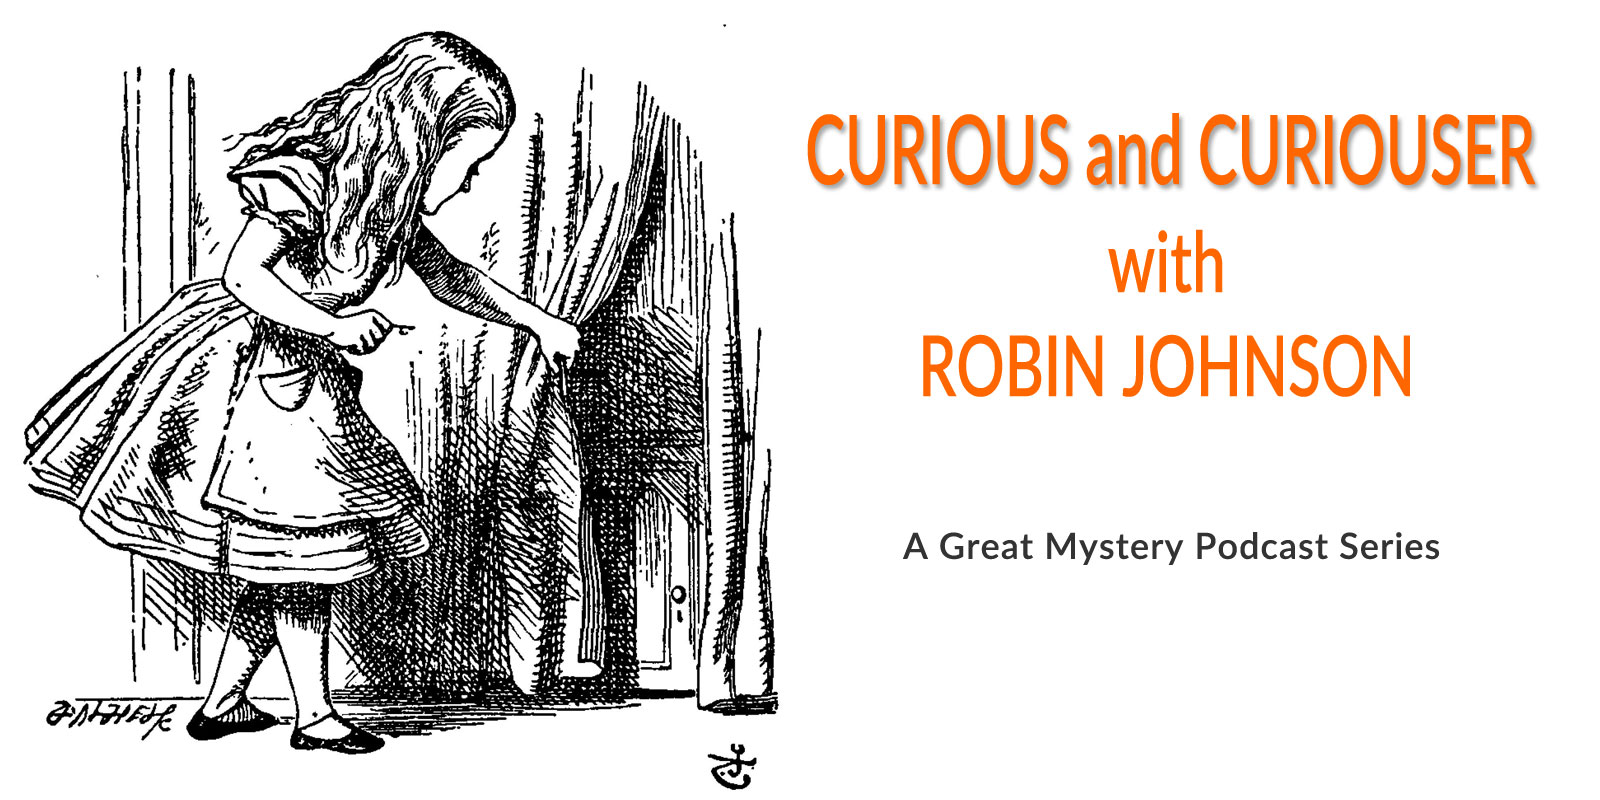 Curious and Curiouser Podcasst with Robin Johnson